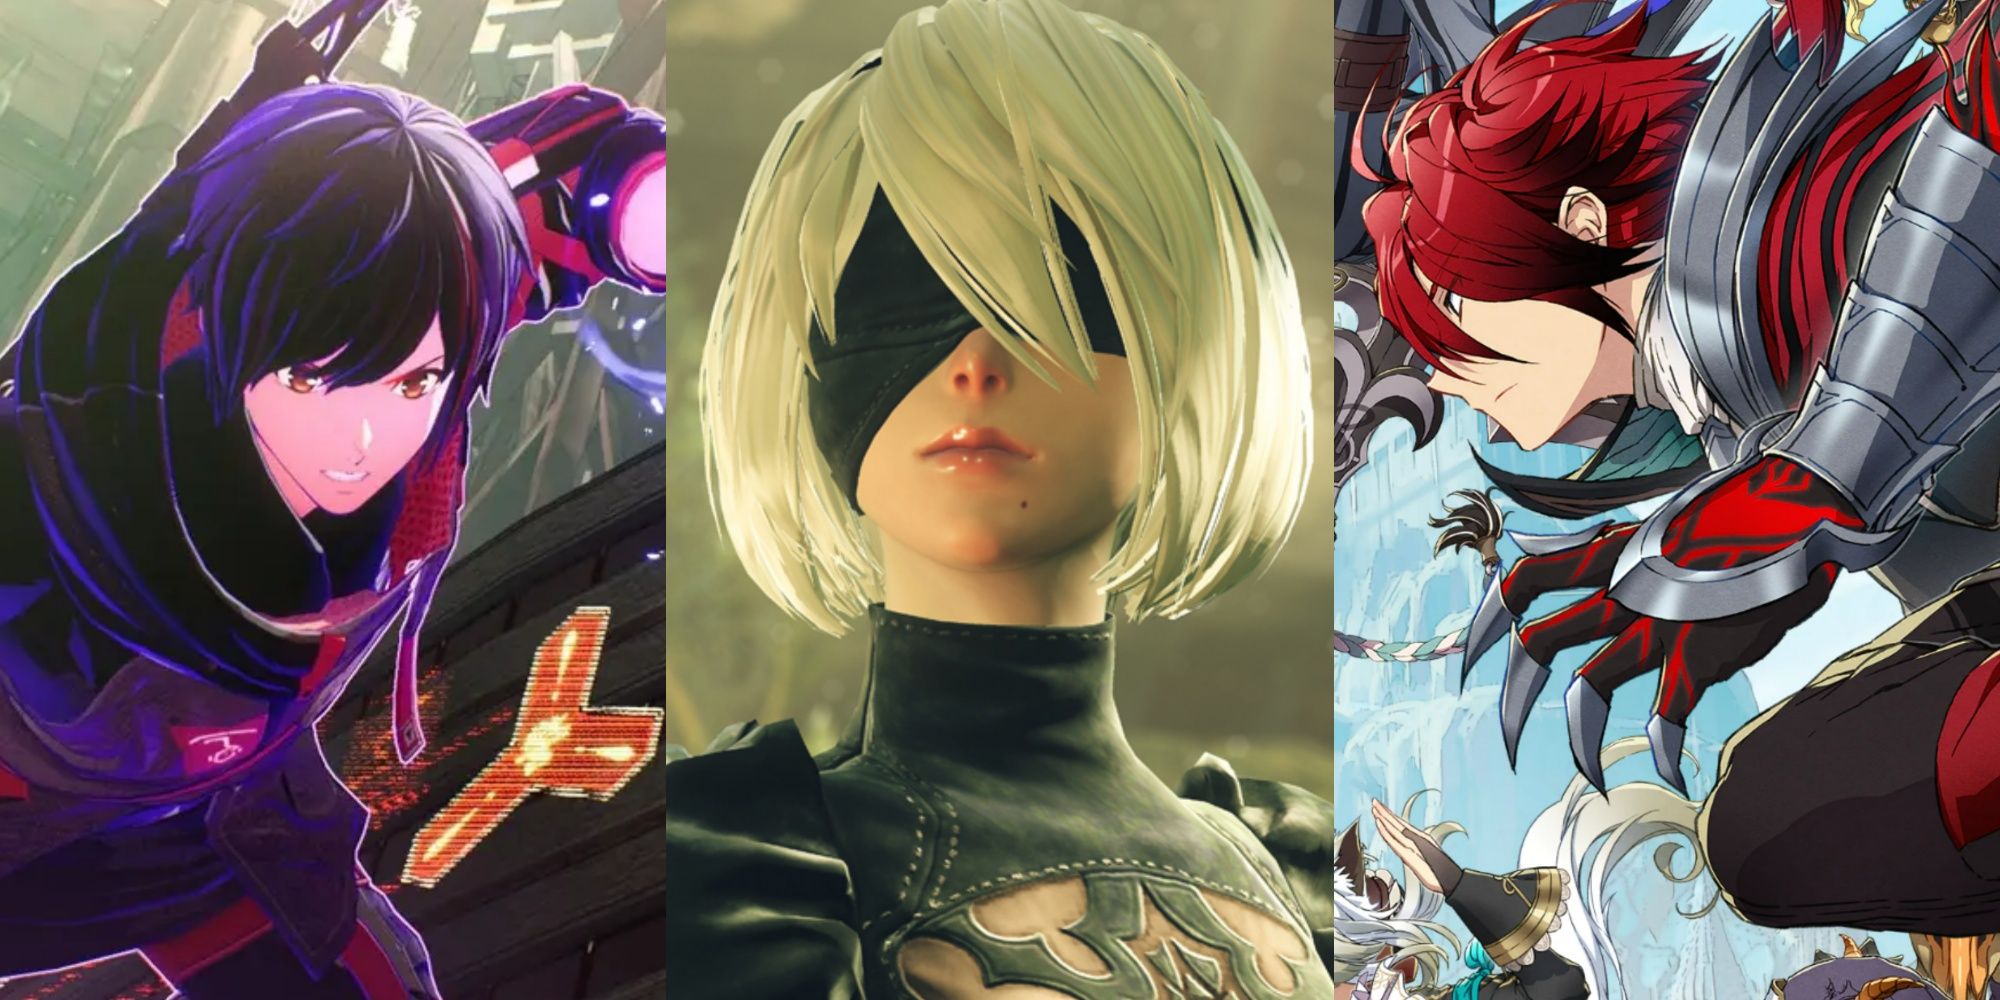 Scarlet Nexus, Nier Automata, and Ys 9 for Action RPGs To Play If You Love Tales of Arise